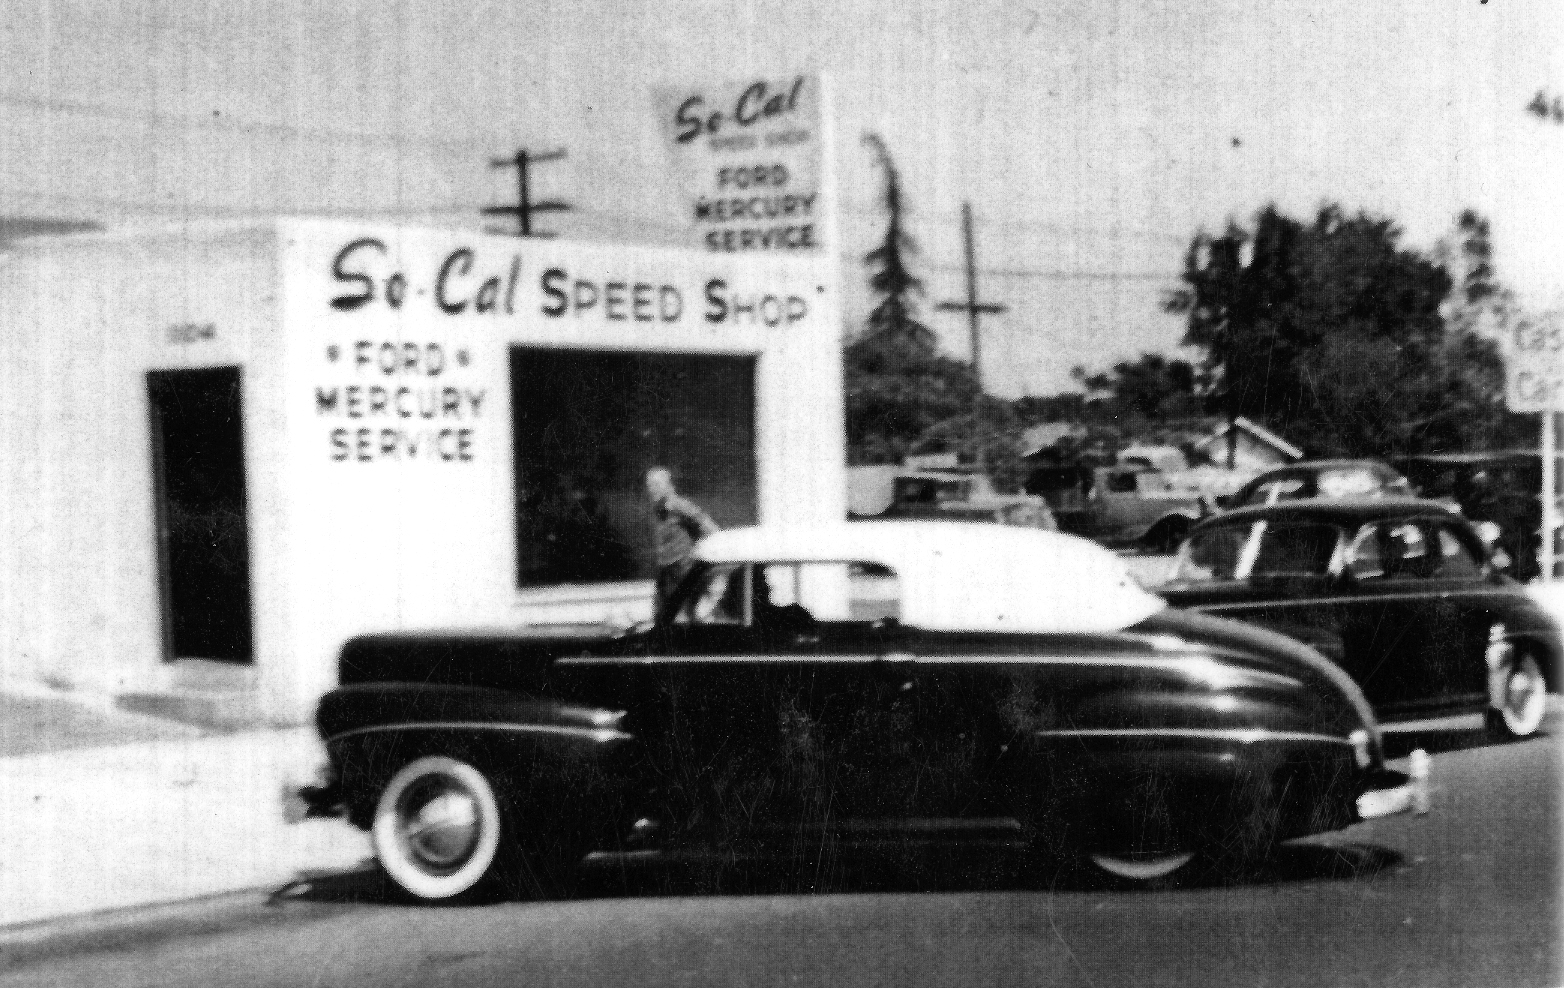 SO-CAL at 75: 'Tanks' for the Memories | THE SHOP